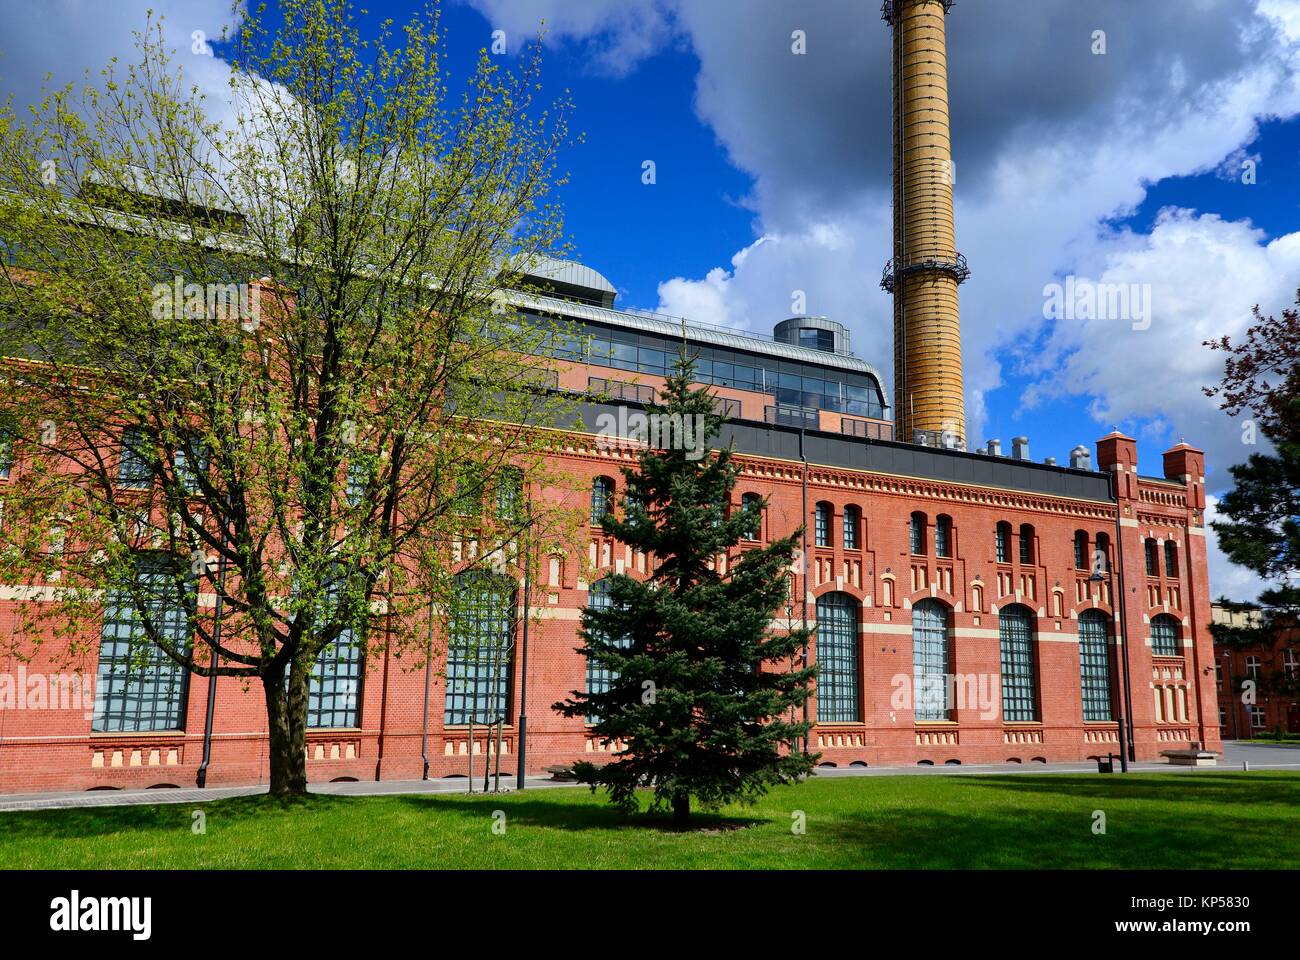 EC 1 - The first city power plant in Lodz was opened in 1907 at Targowa street and operated until 2001, from 2008 the whole complex of buildings of Stock Photo